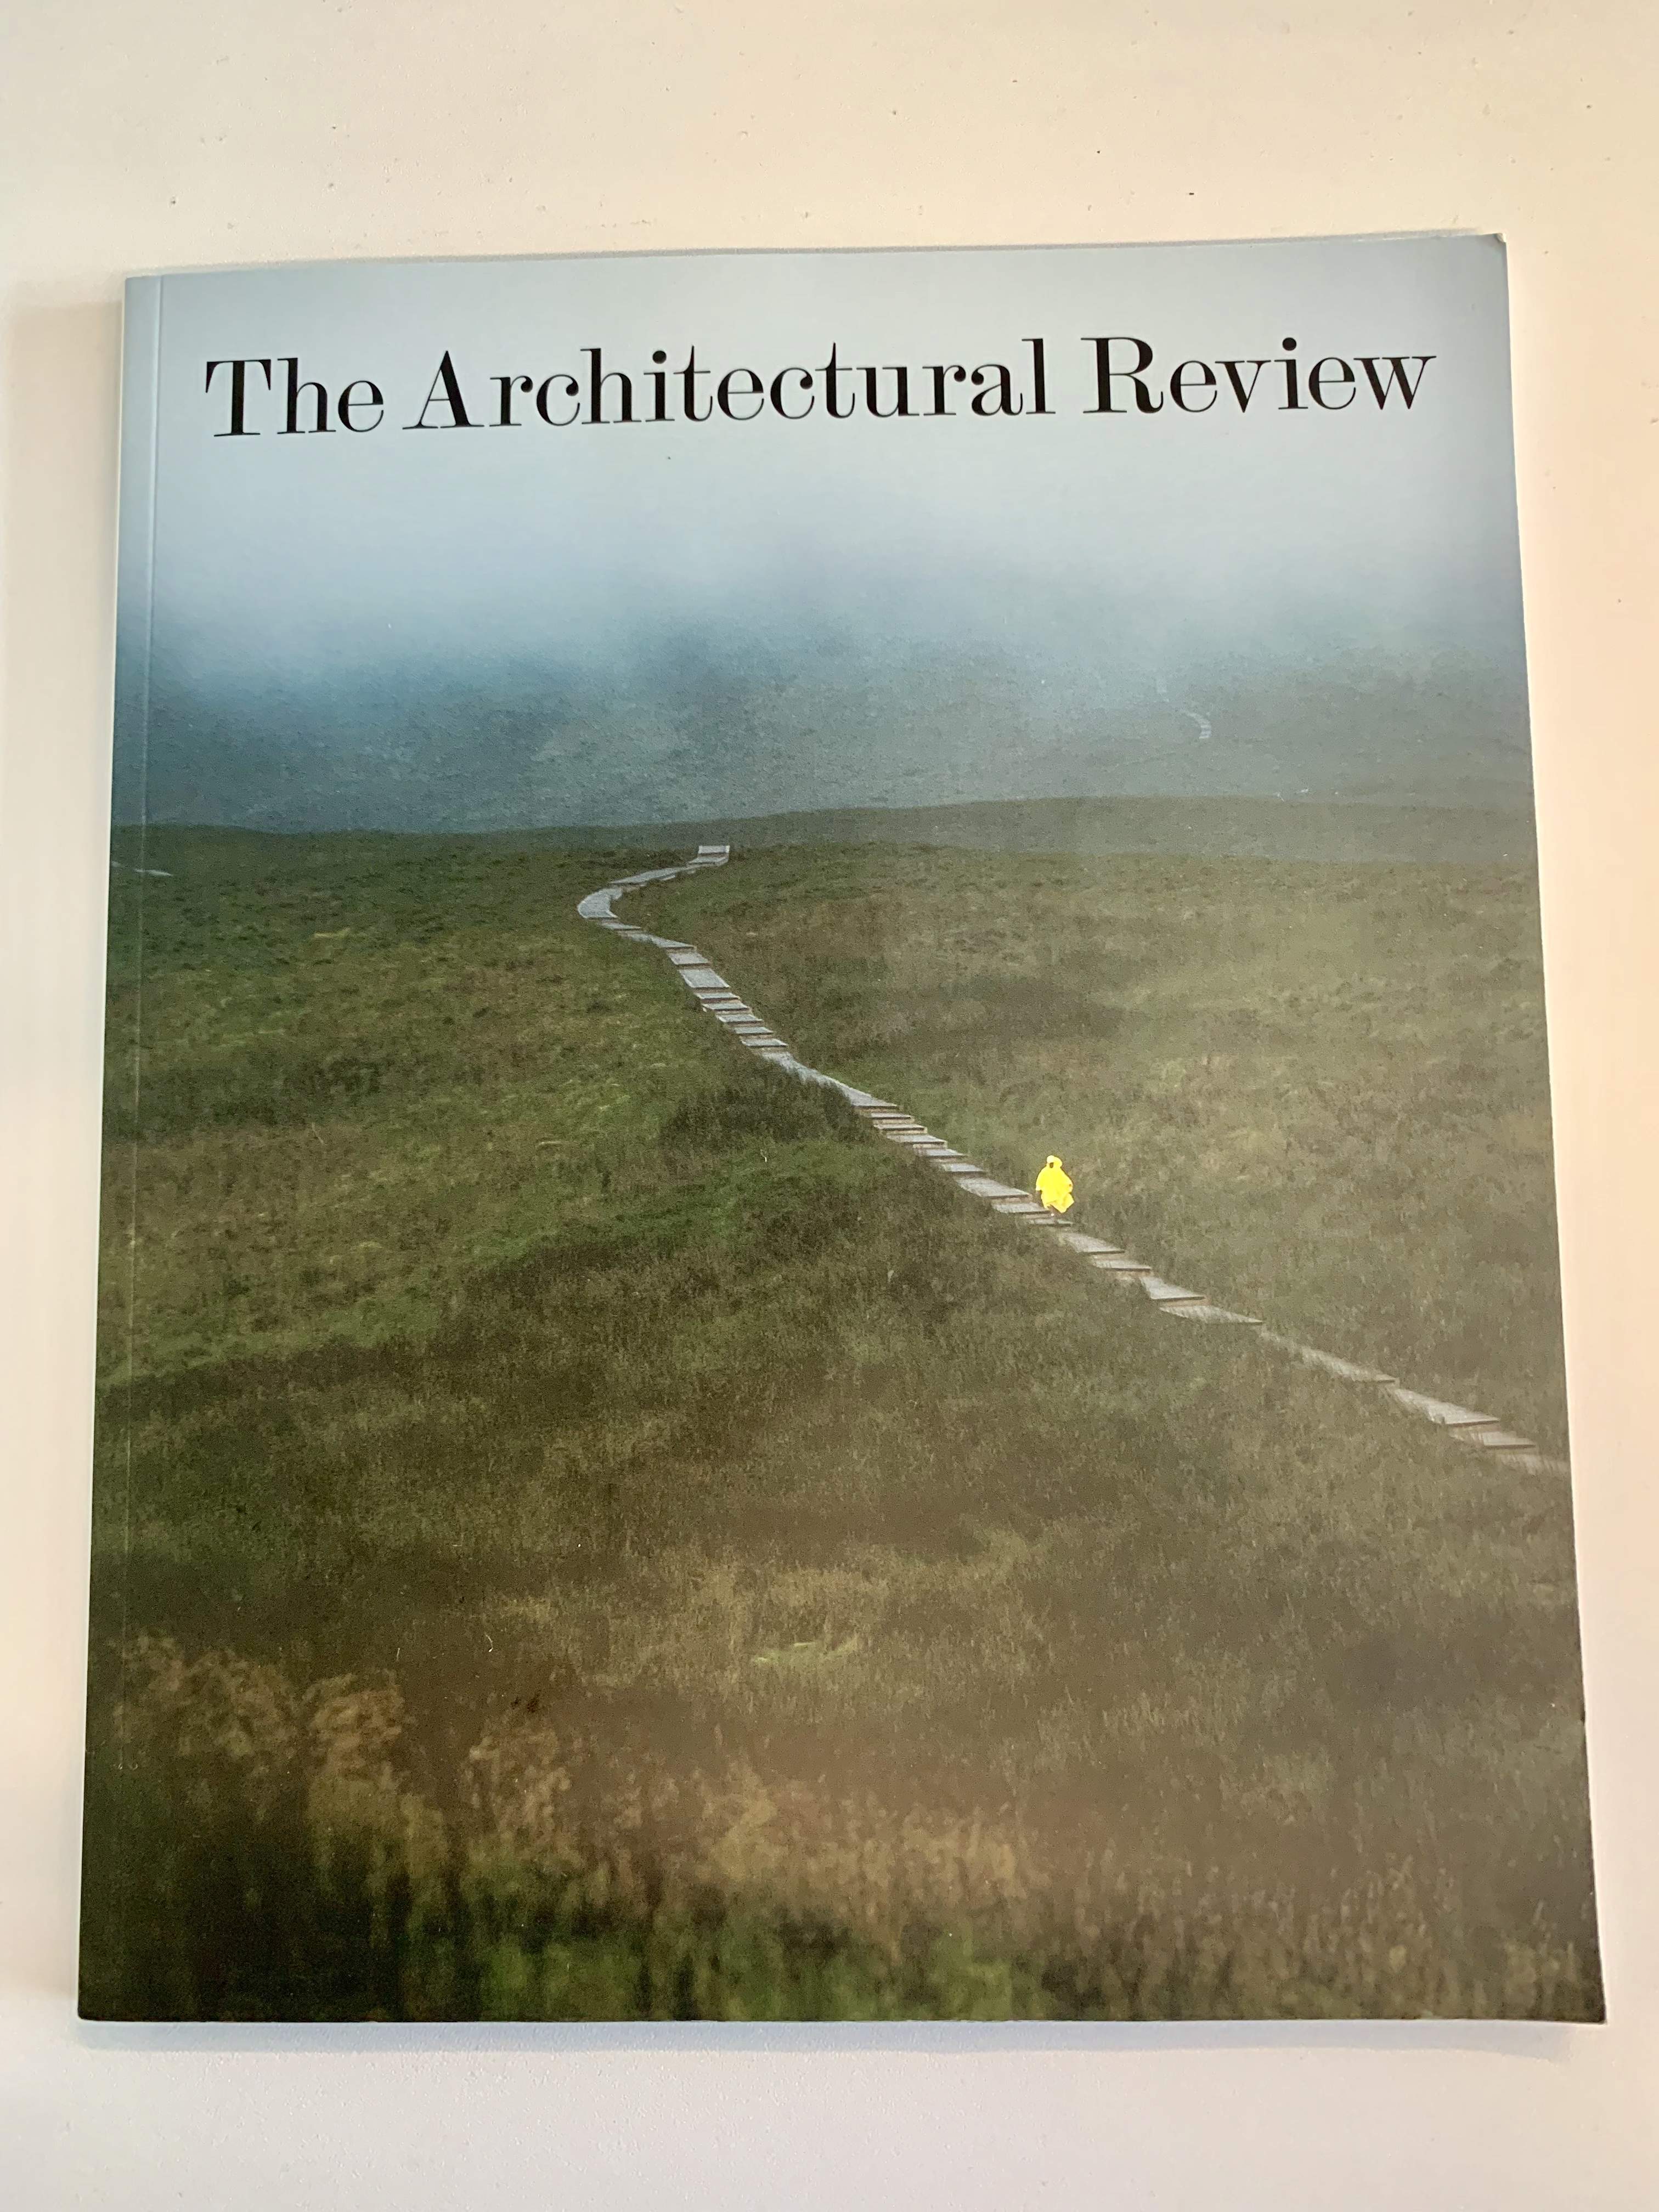 Across and In-Between is June 2019's Front Cover of Architectural Review